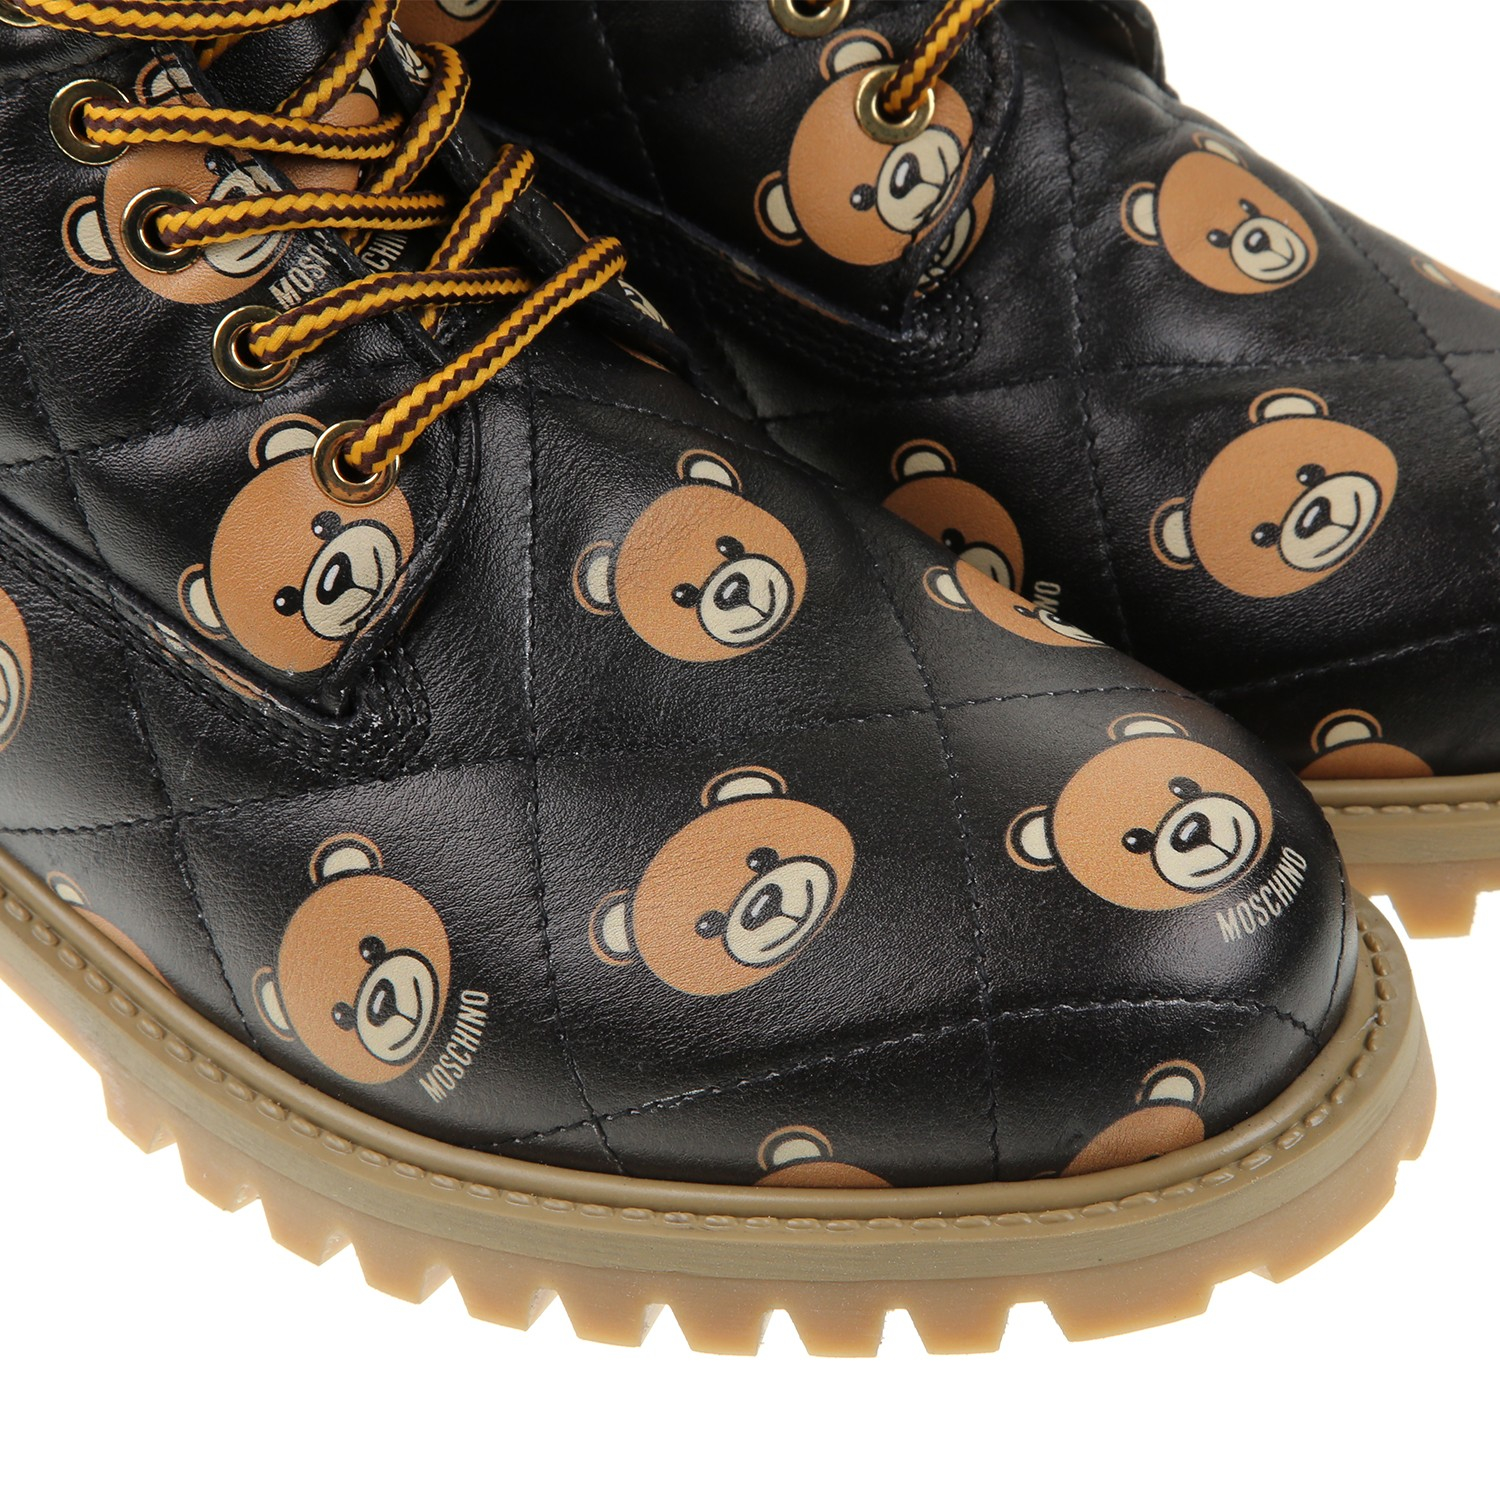 Moschino Teddy Bear Quilted Hiking Boots in Black Lyst